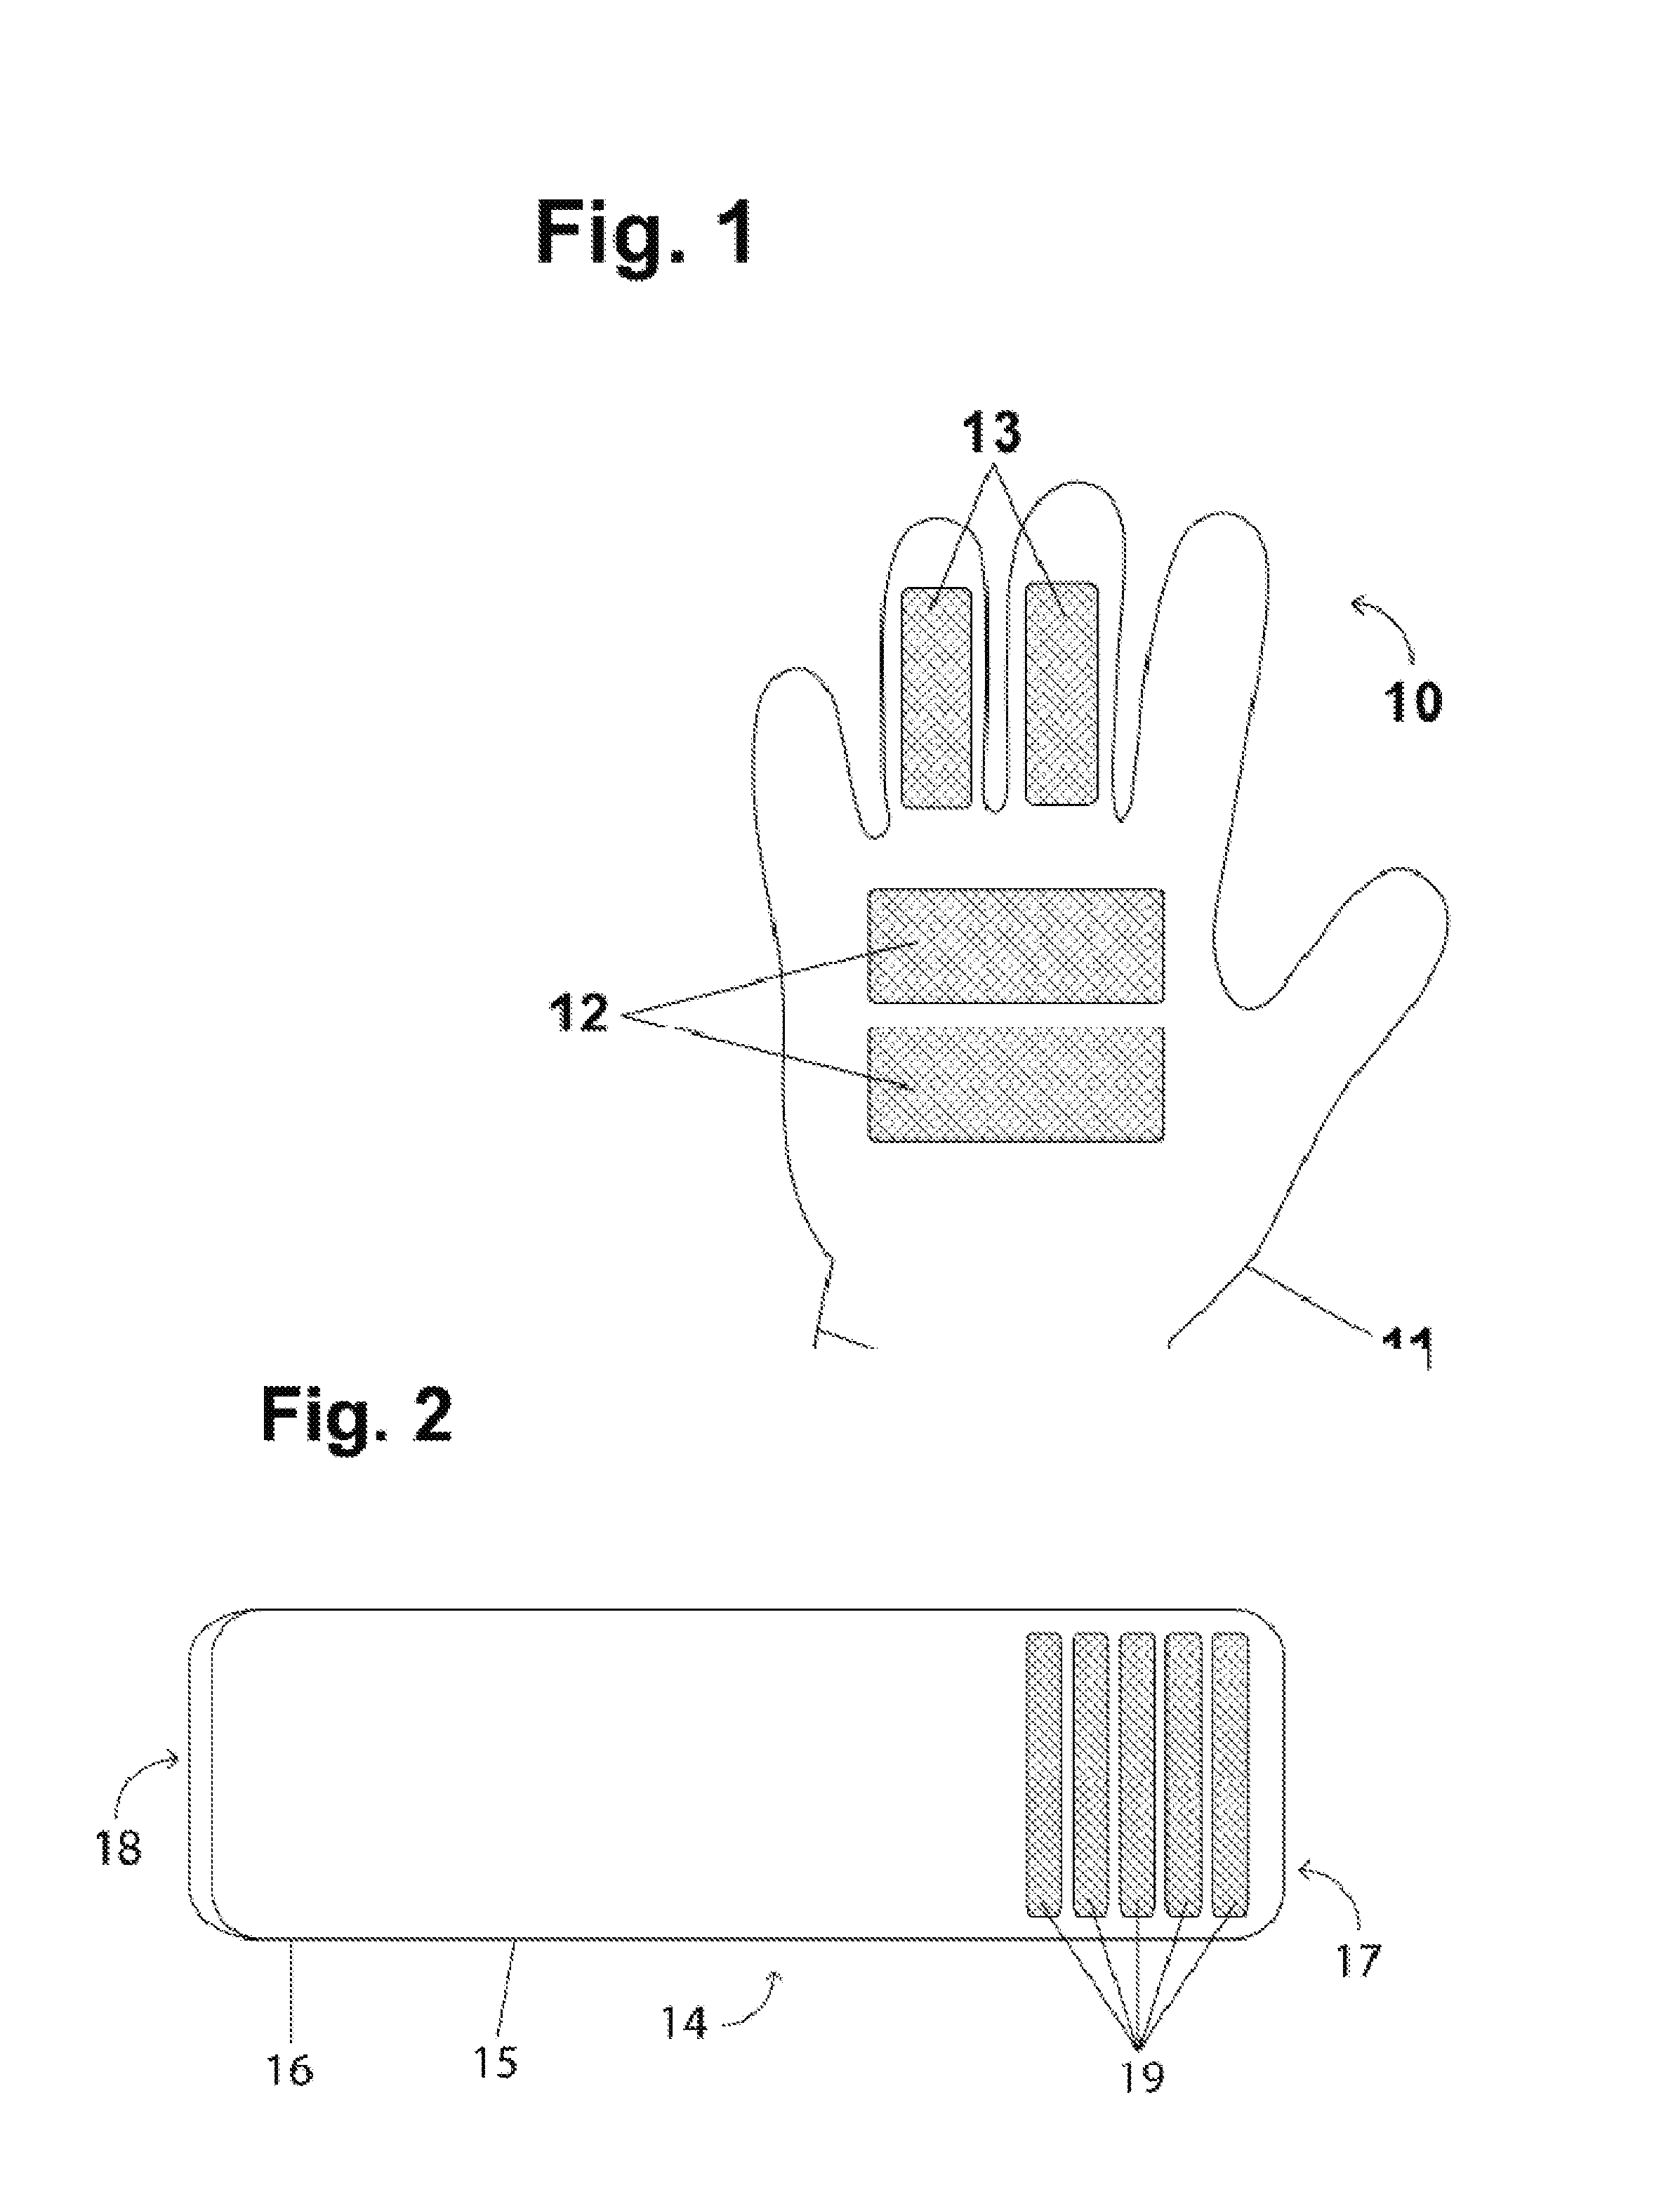 Support and stabilization device for dialysis treatment